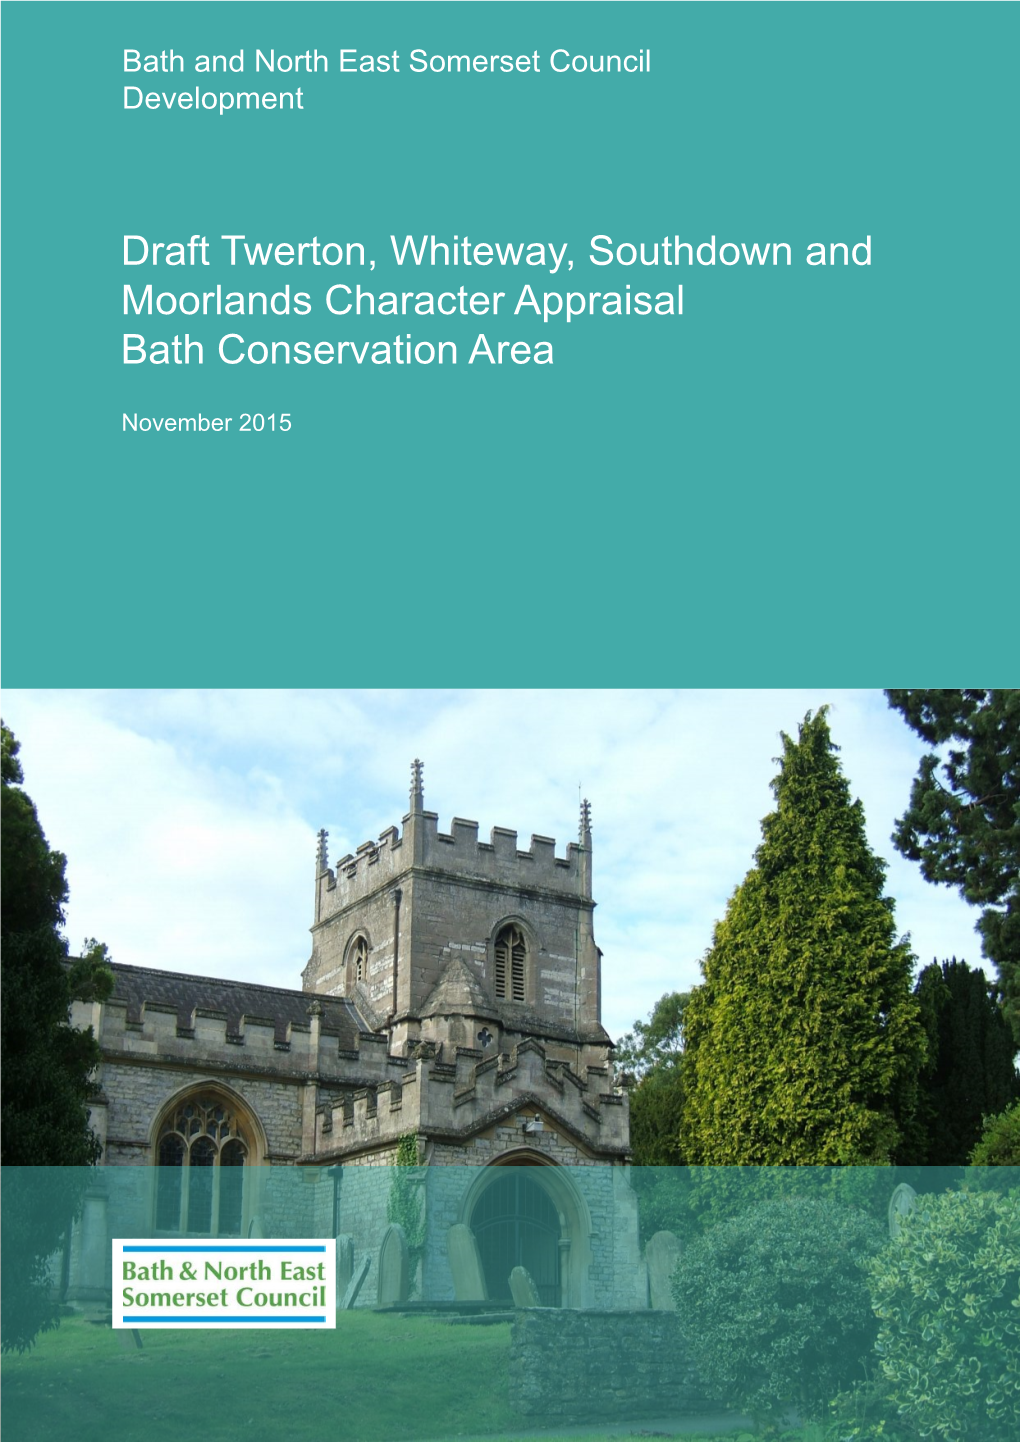 Draft Twerton, Whiteway, Southdown and Moorlands Character Appraisal Bath Conservation Area